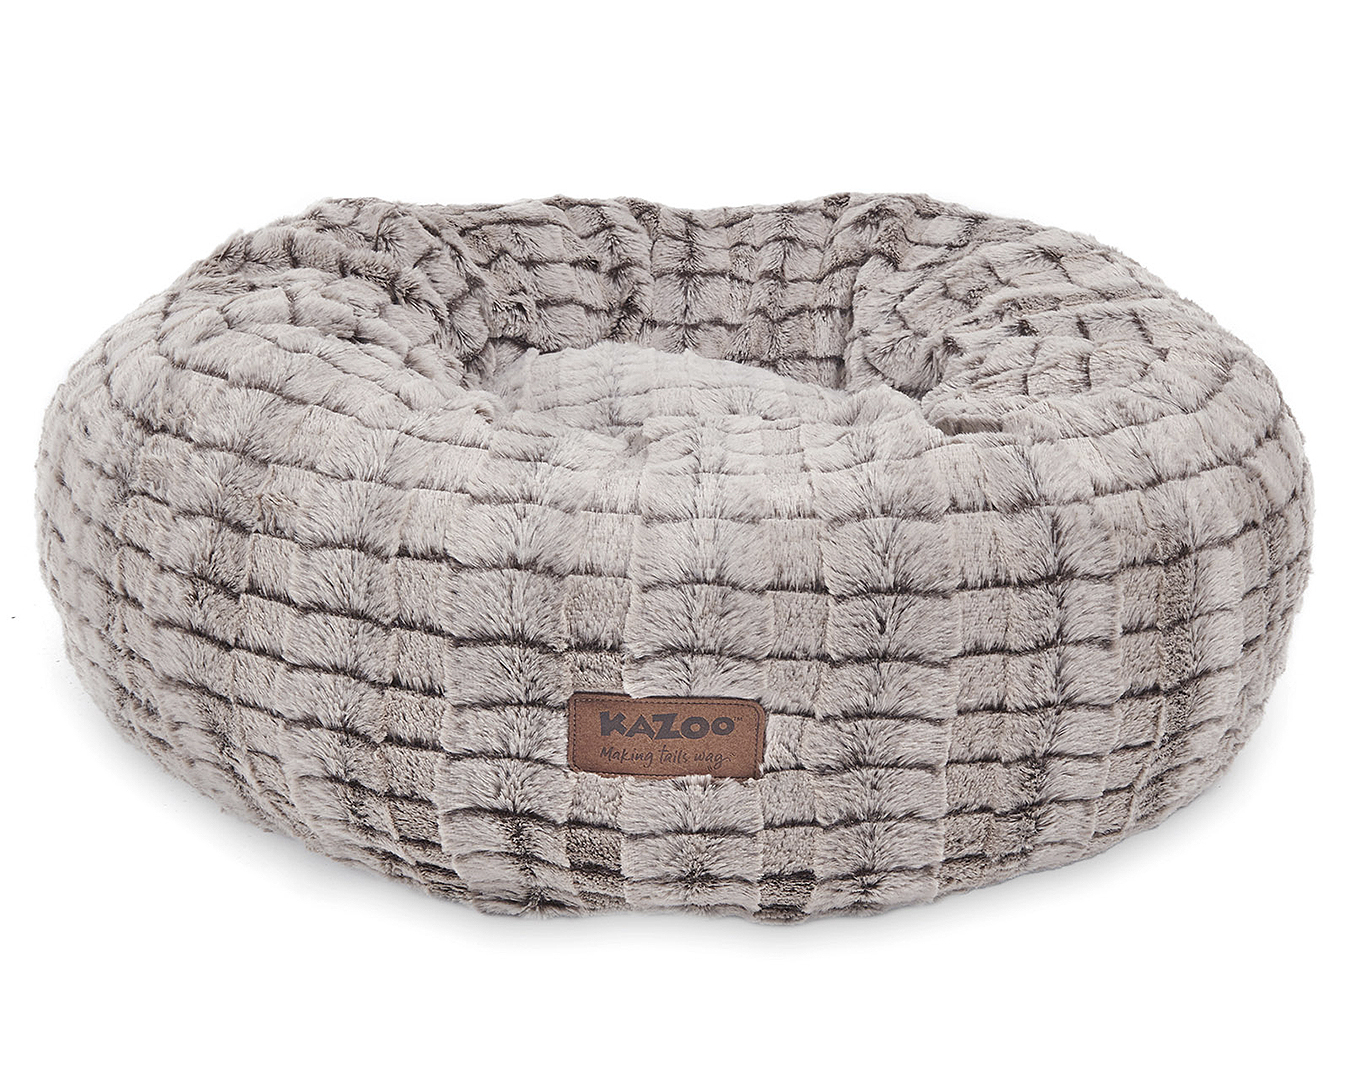 The best dog bed for medium dogs is this round number from Kazoo.